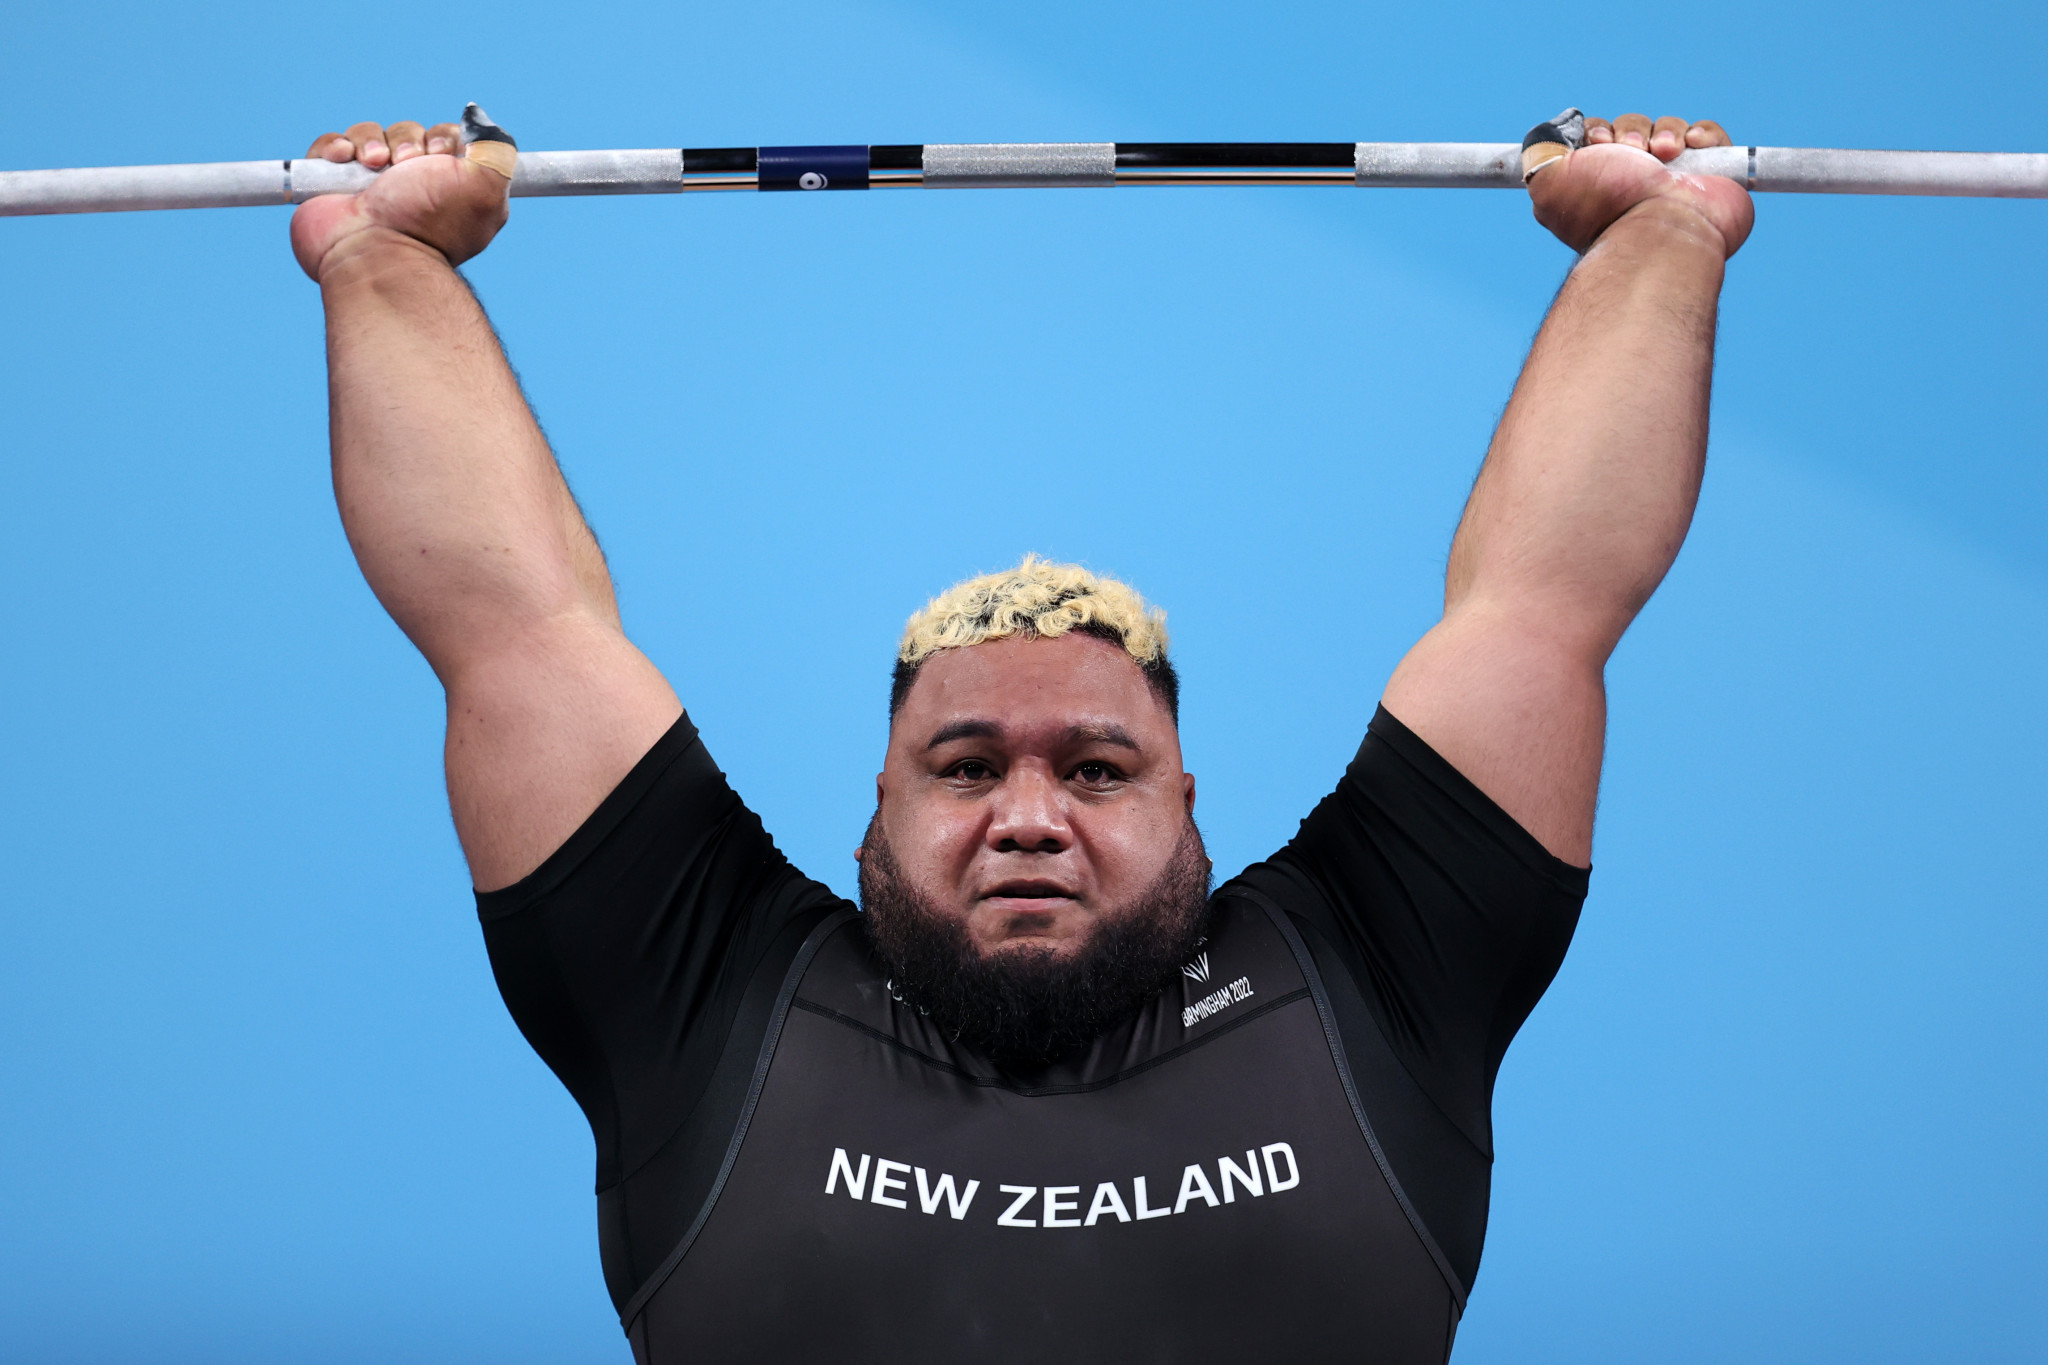 New Zealand super-heavyweight David Liti is among other weightlifters from Oceania chosen by the IWF to be part of its Athlete Direct Support Programme ©Getty Images